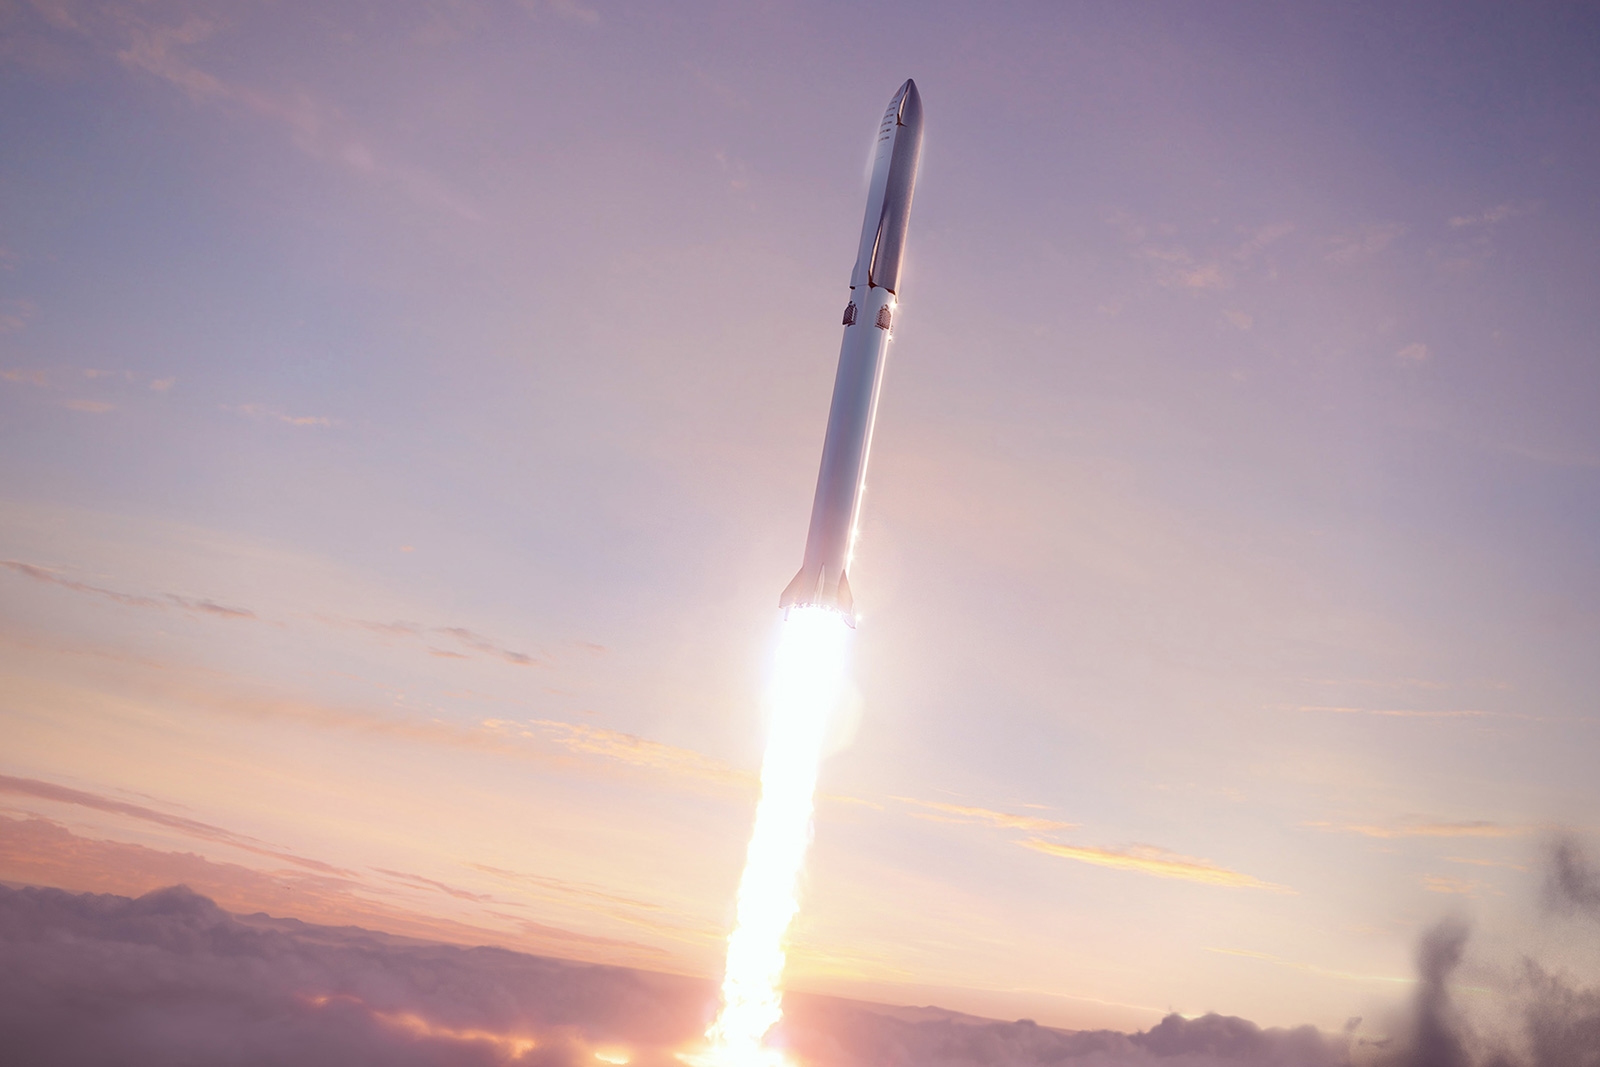 SpaceX will try to 'catch' its Super Heavy rocket using the launch tower | DeviceDaily.com